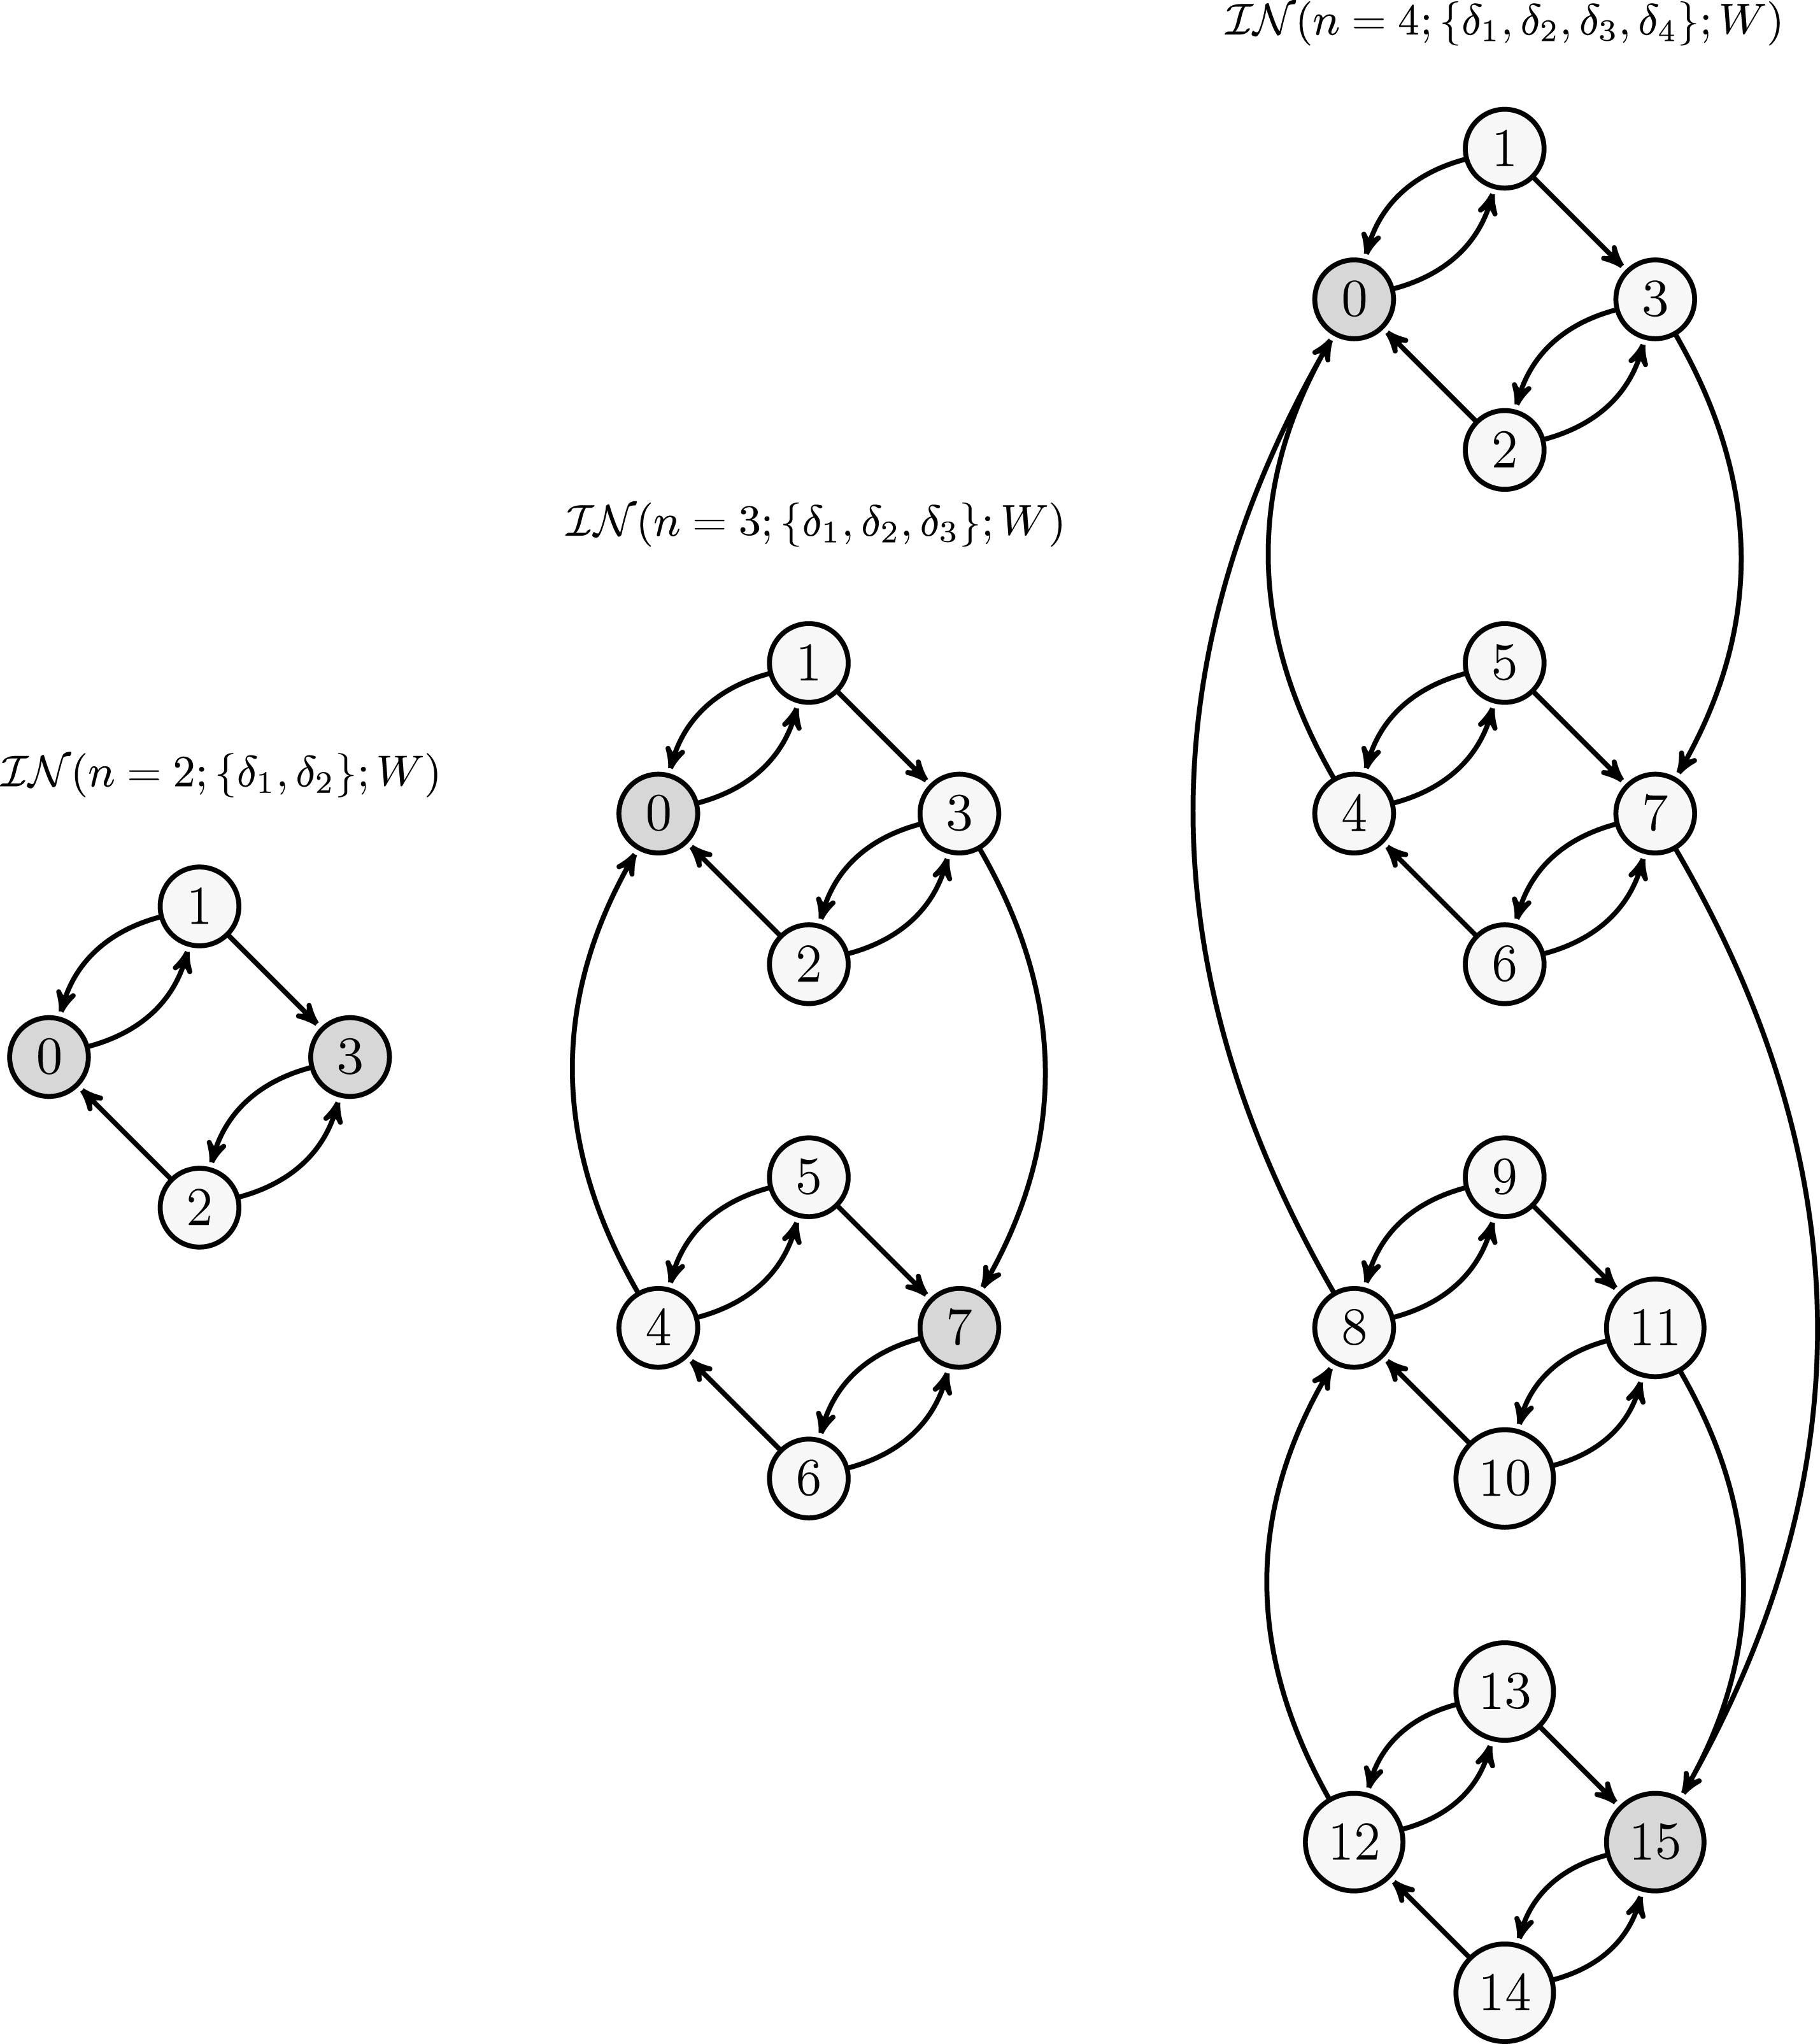 From left to right: 2-, 3- and 4-dimensional intrinsic networks 
IN, where transitions between states s are represented. Shaded nodes represent blind-spots. Each transition is associated with a probability.